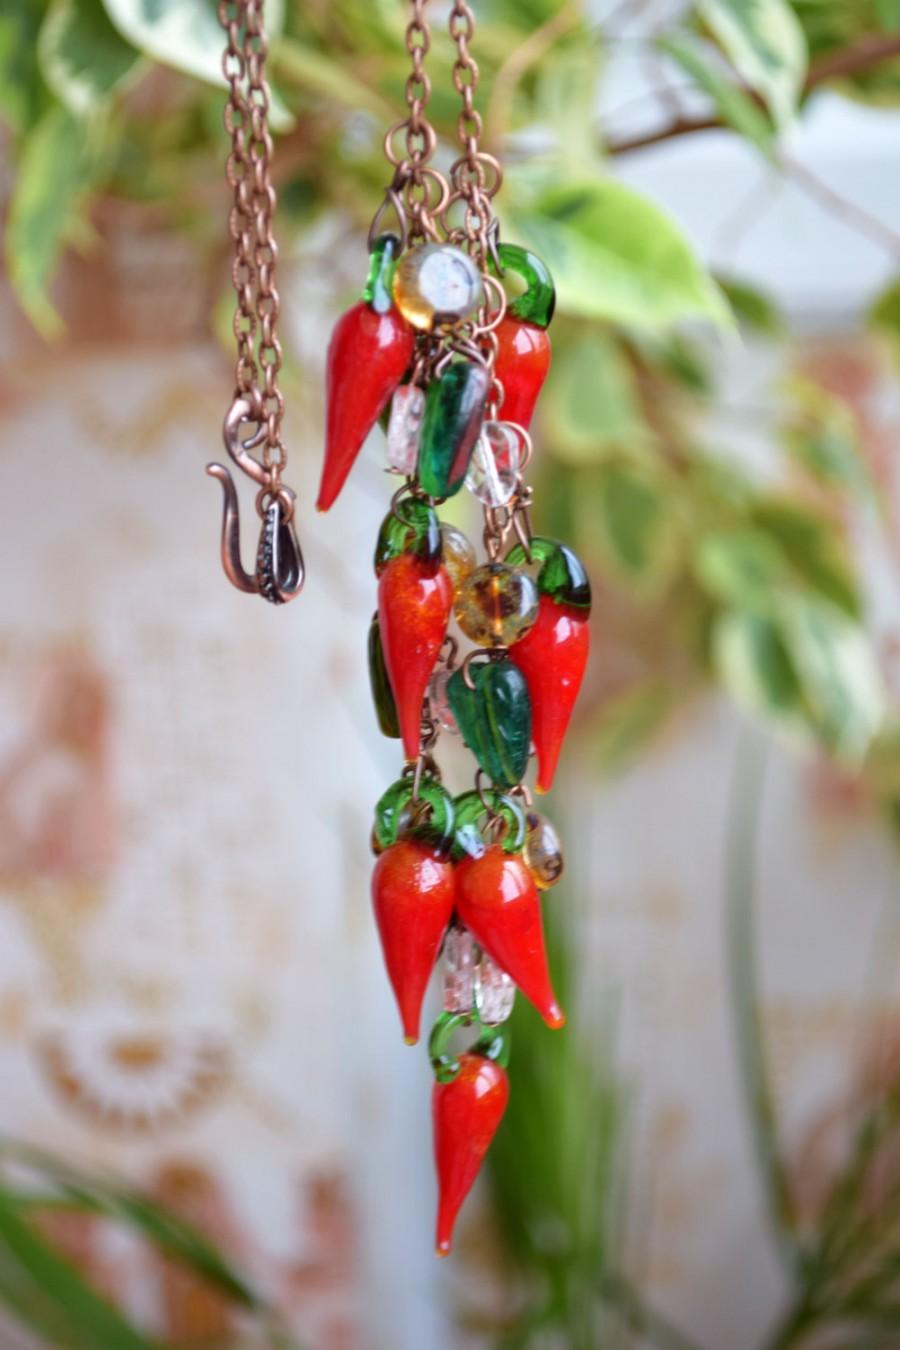 Hochzeit - Glass Chili Pepper necklace-Fall necklace-Autumn jewelry-Lampwork beads necklace girlfriend gift hot chilli pepper glass necklace-red-green